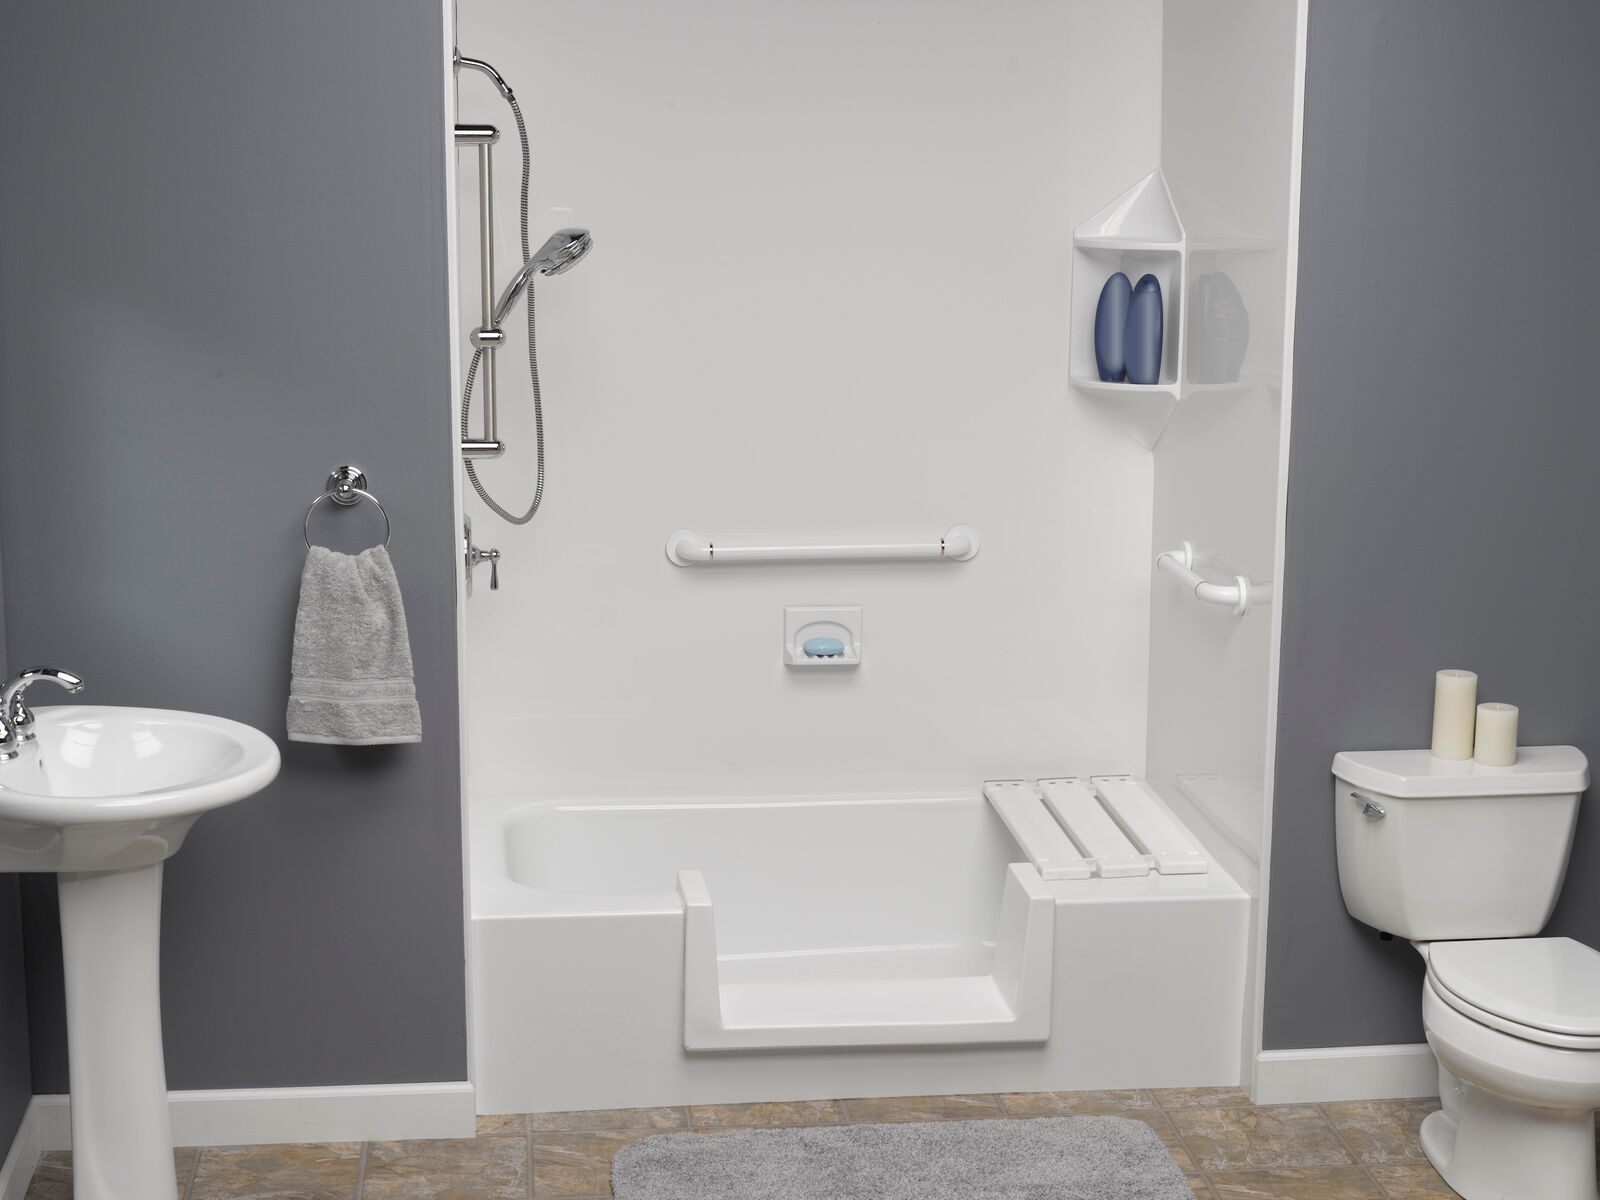 Walk-In Bathtub Shower Do-It-Yourself Kit For Senior Safety And Accessibility